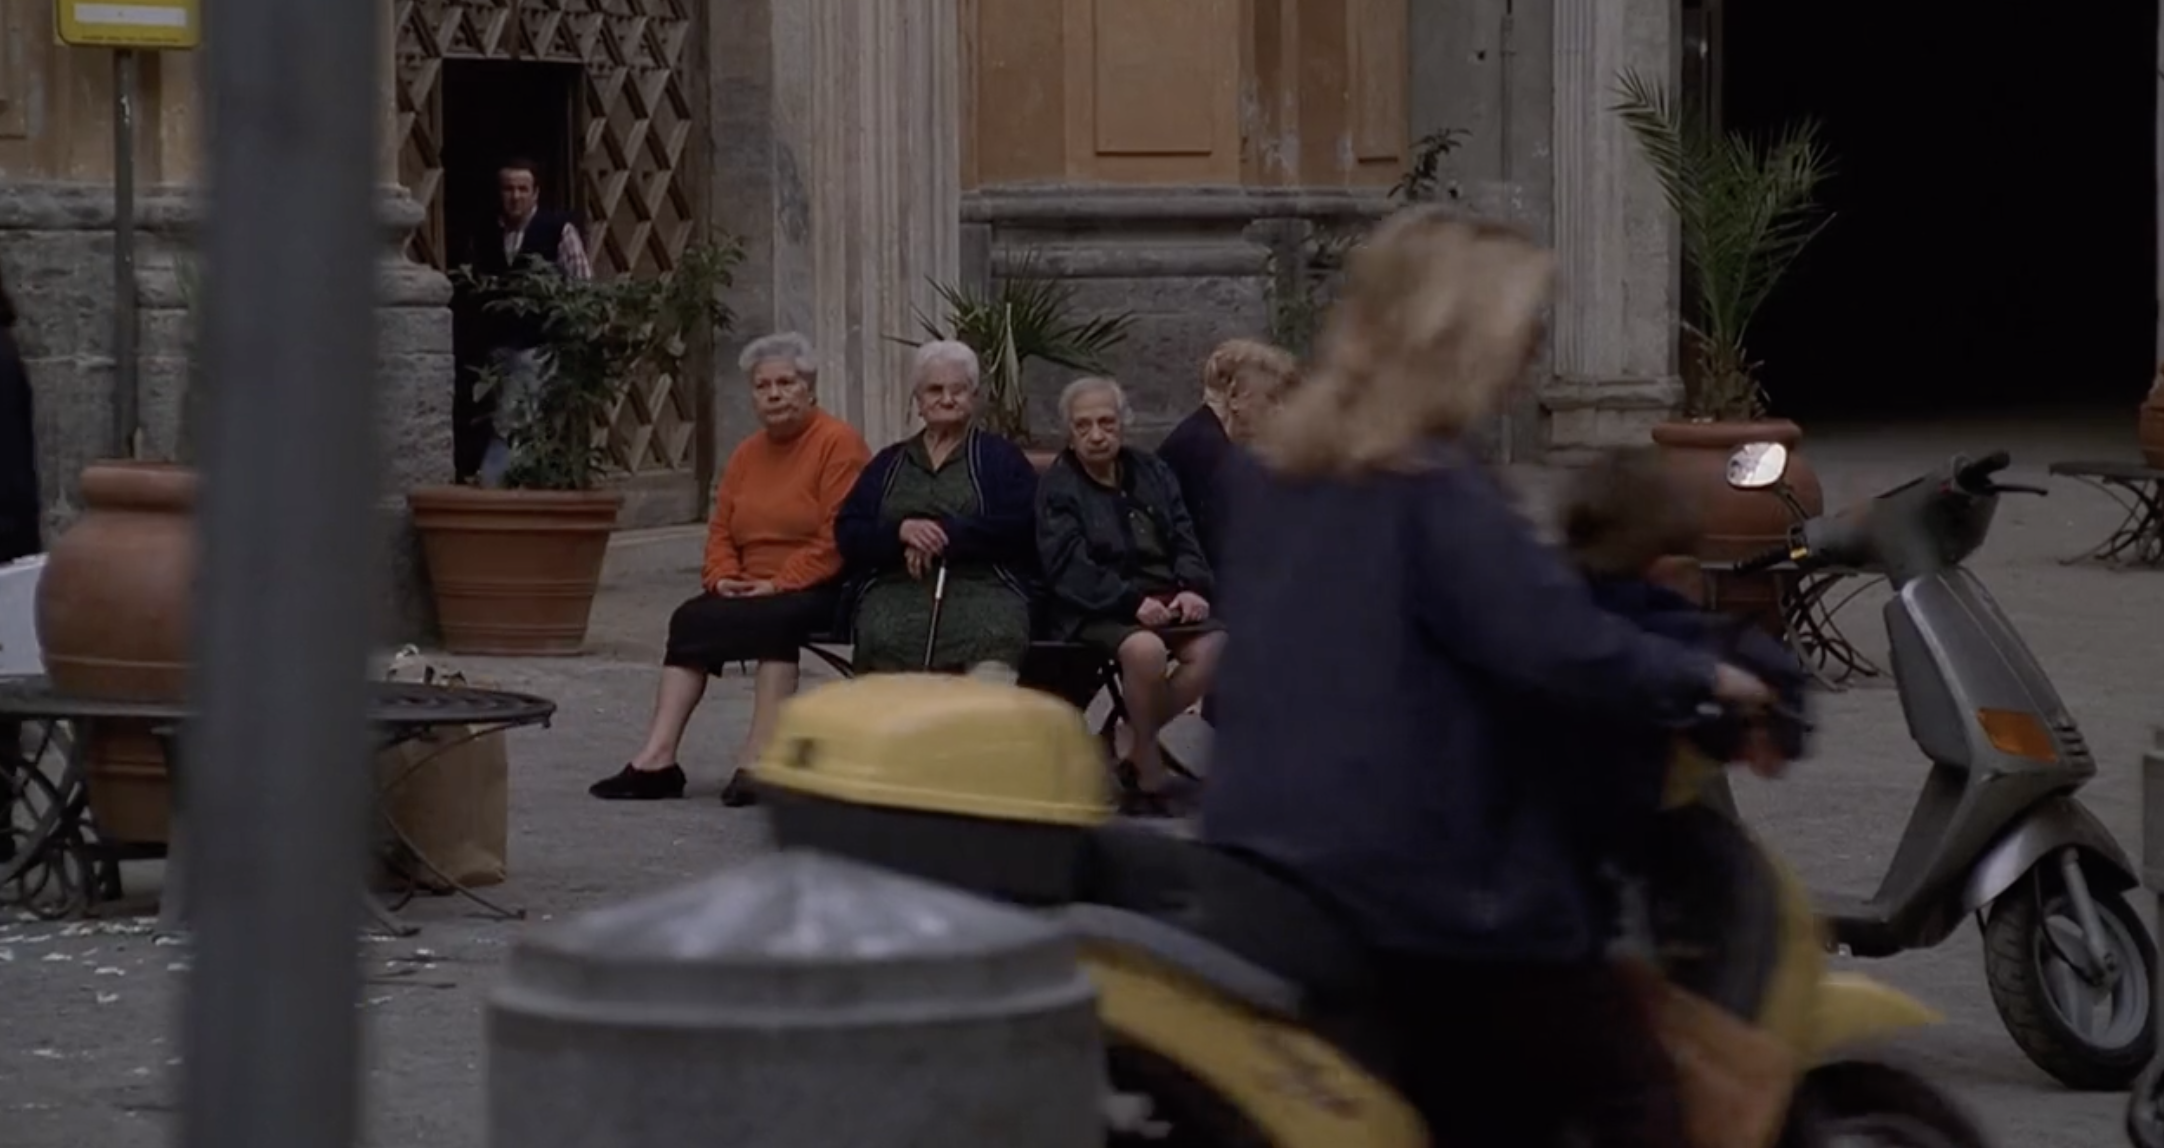 HBO/Entertainment image credit. Image of ladies sat on public bench in The Sopranos